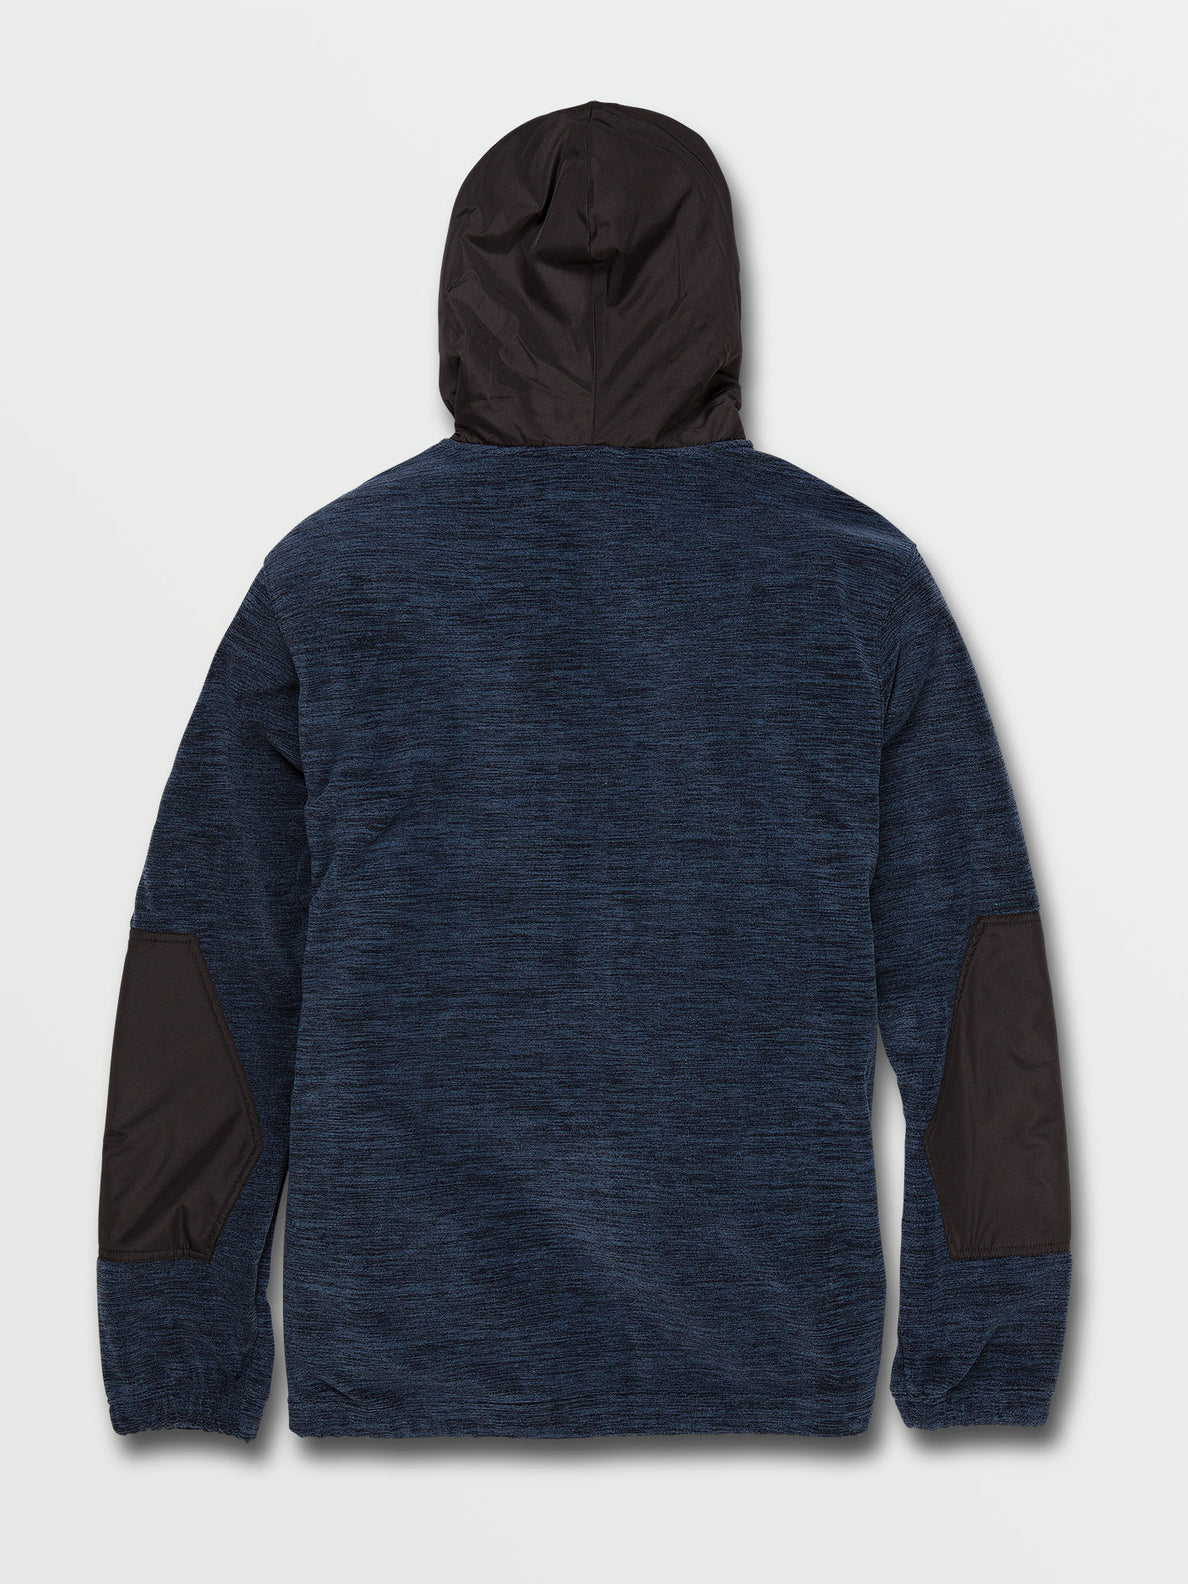 Yzzolater Lined Zip Hoodie - Navy (A5832100_NVY) [B]